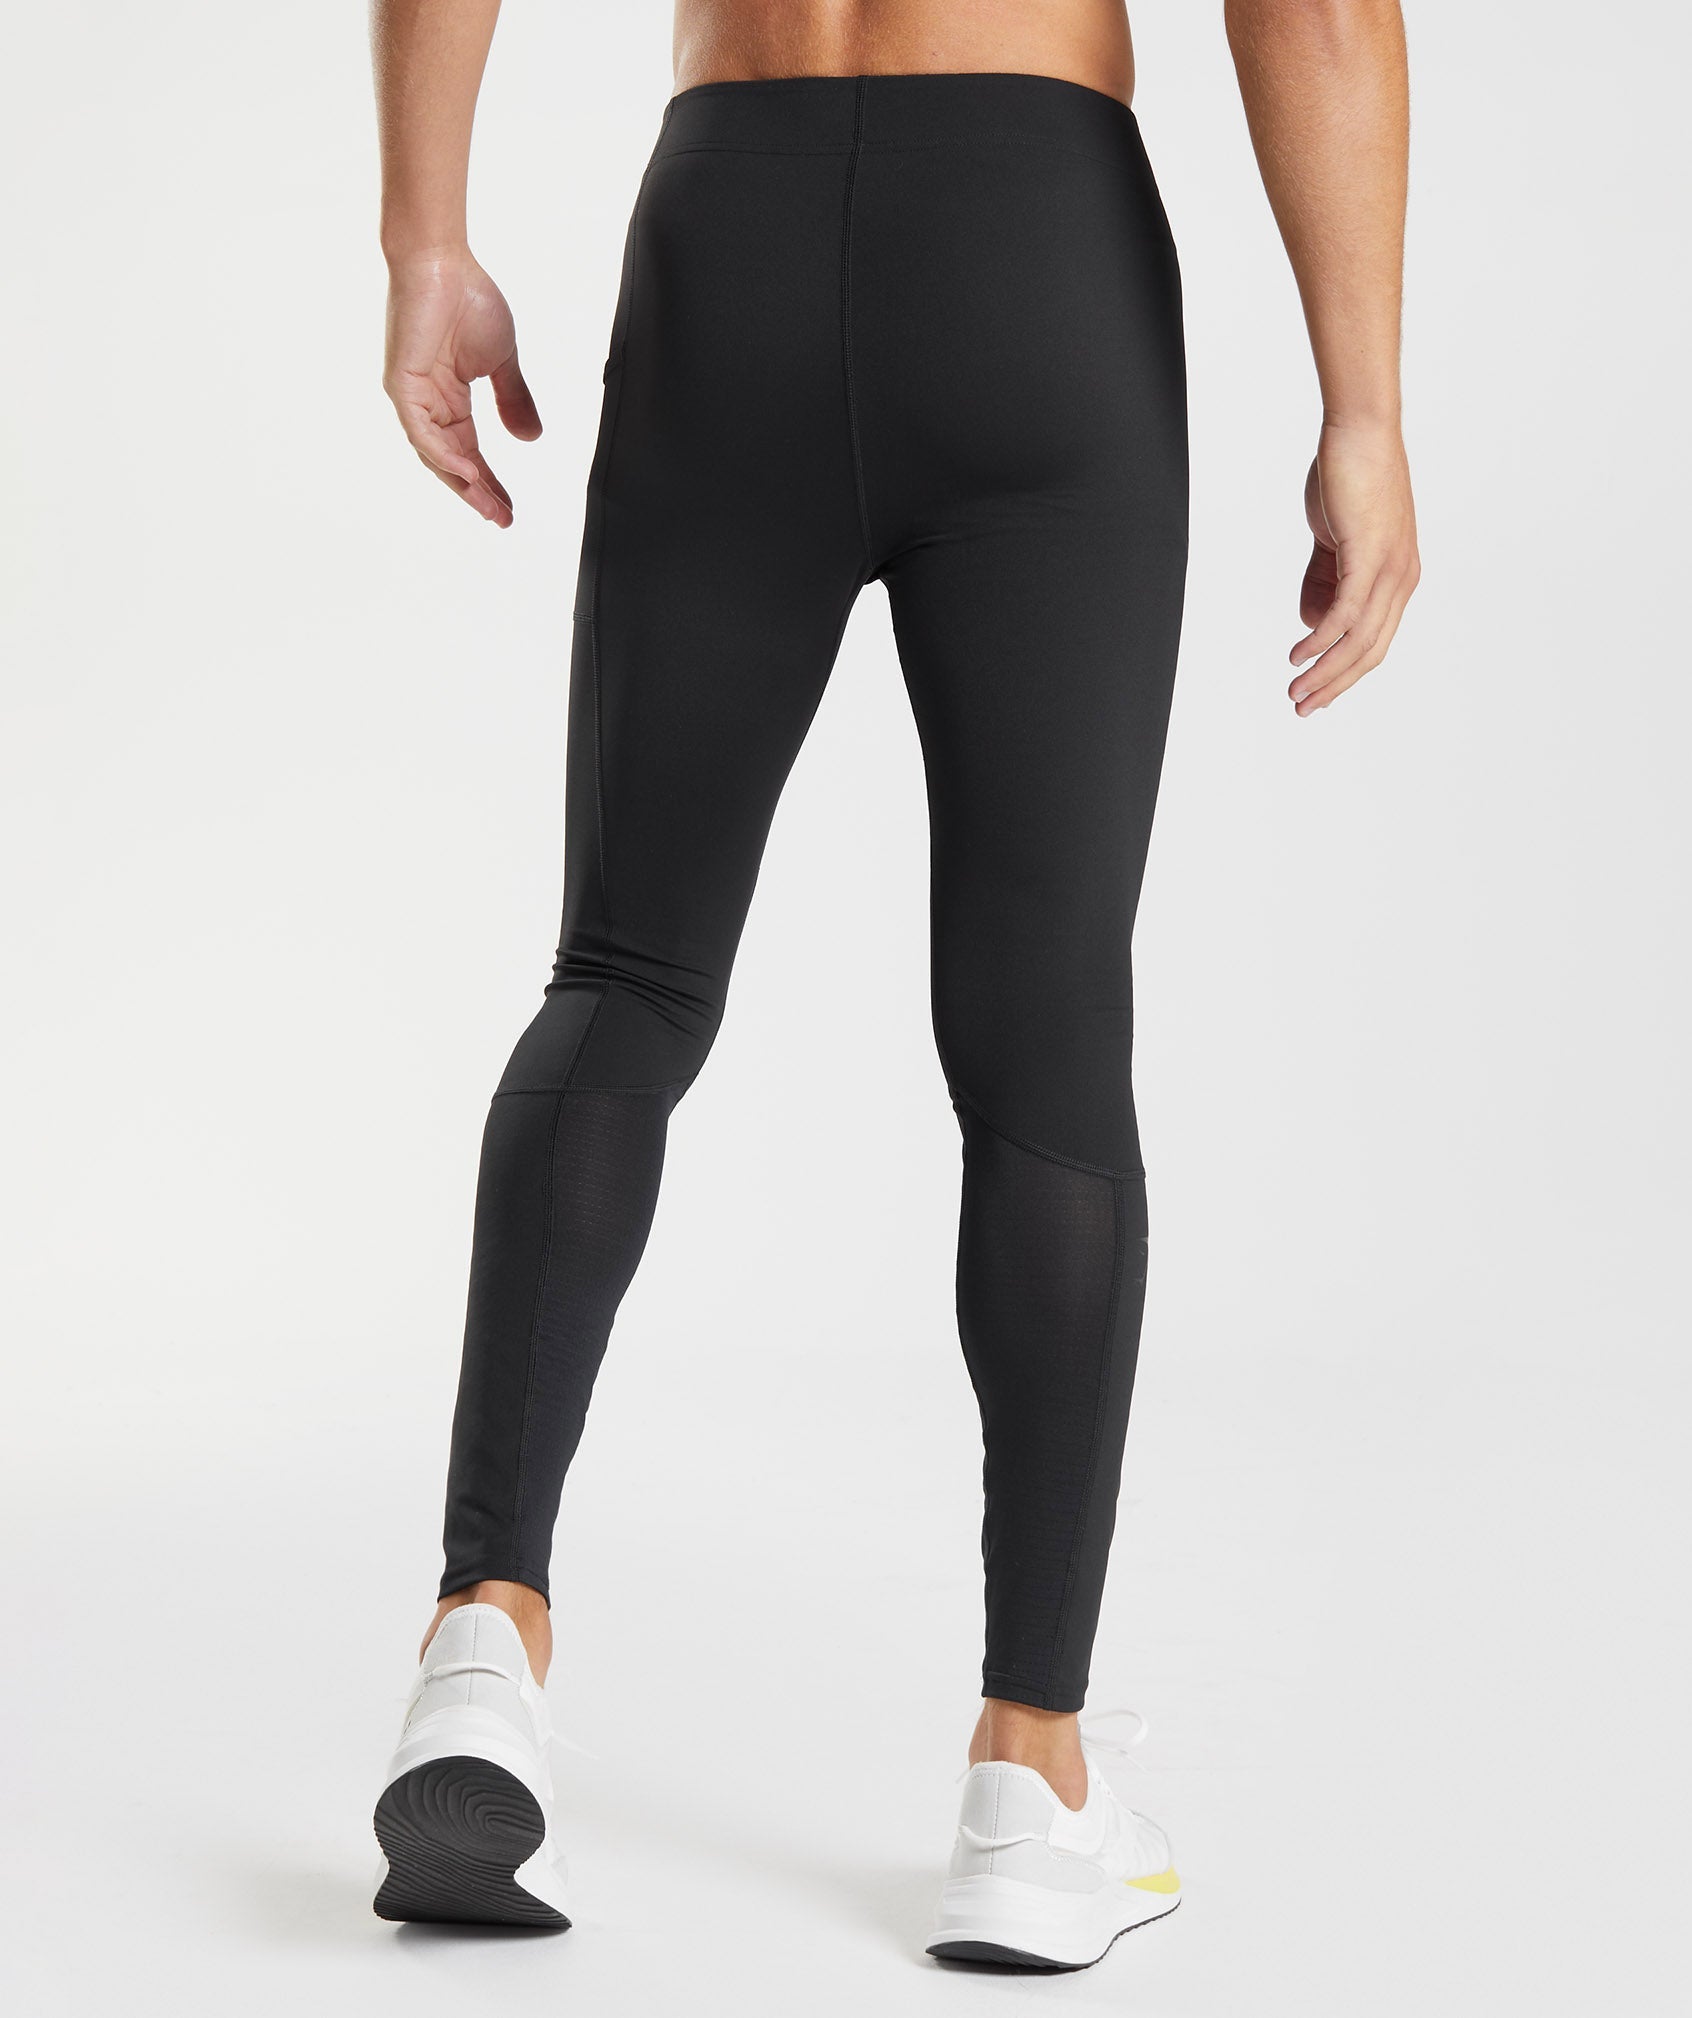 SLIM High Waisted Black Indigo Panel Compression Leggings with Silver Anti-bacterial  Finish (OUTLET) - Proskins Men and Womens Baselayers and Sportswear